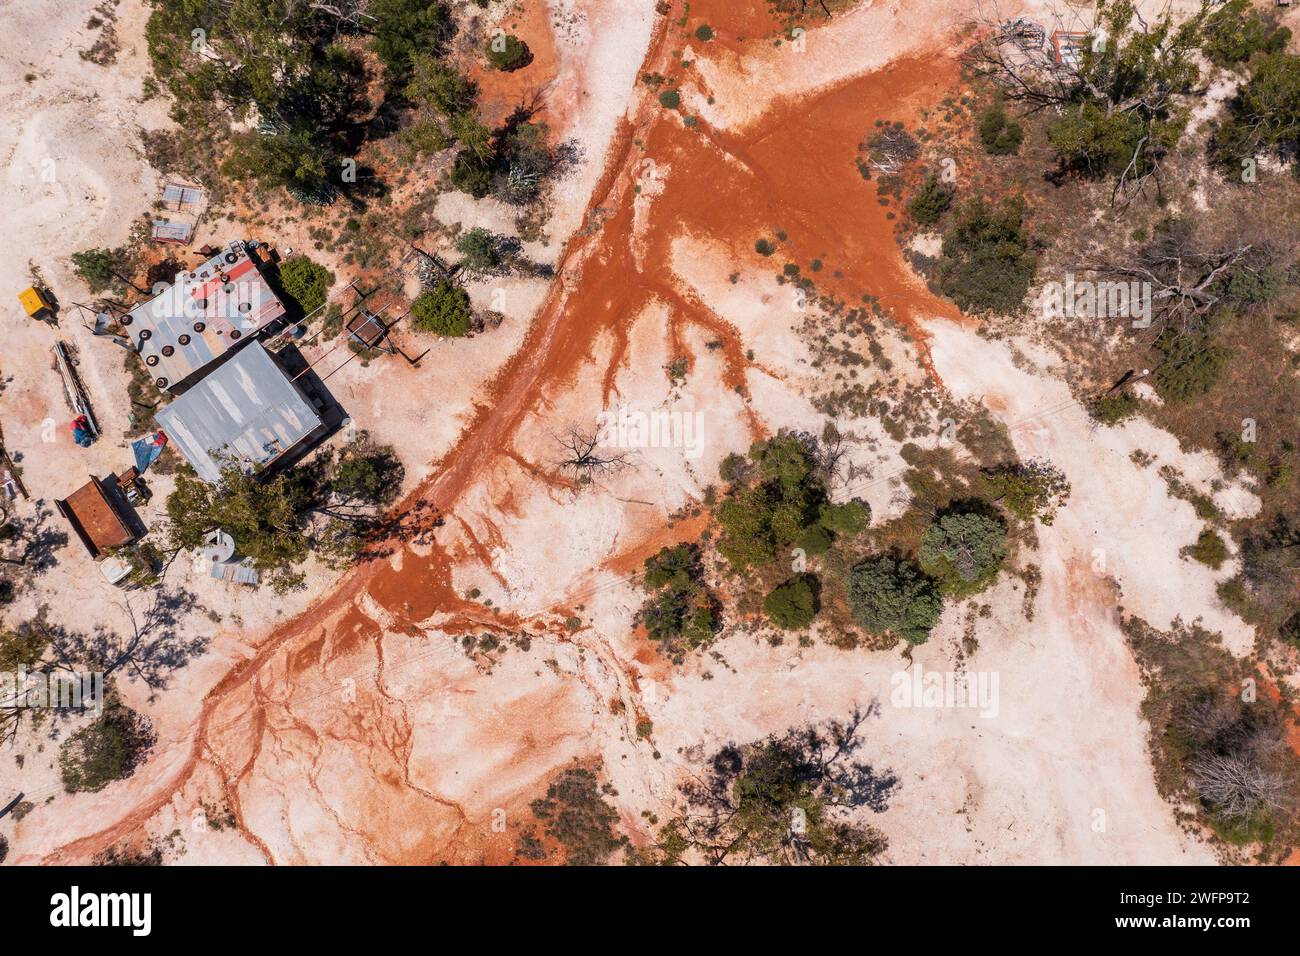 Aerial view of an opal mining camp in an outback landscape near Lightning Ridge in Out back New South Wales, Australia. Stock Photo